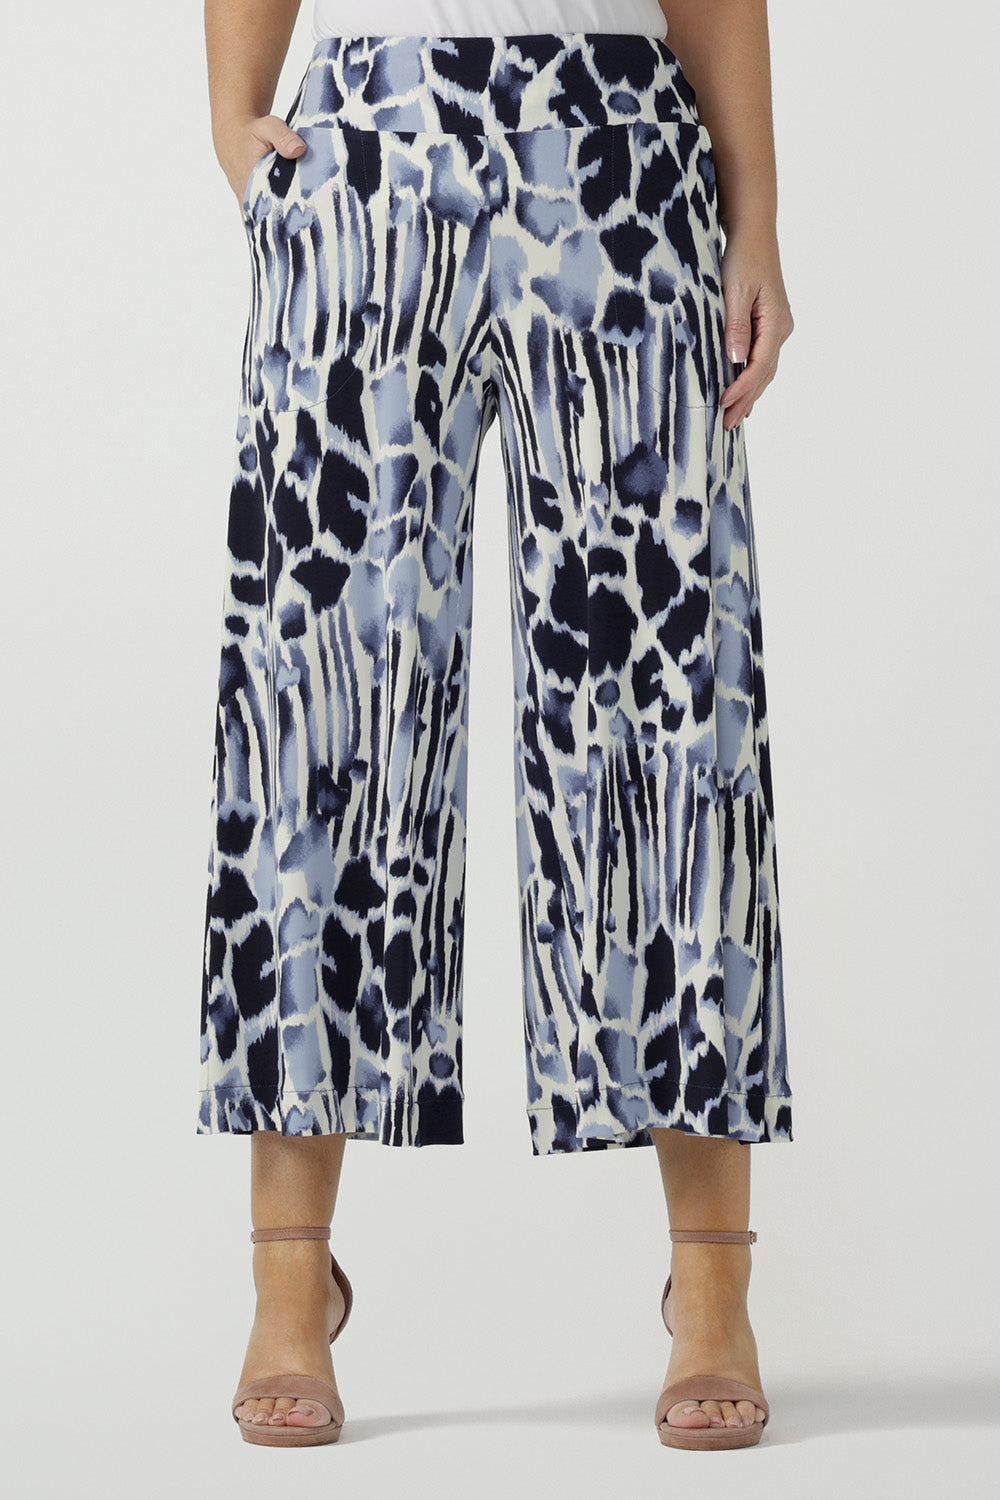 Cropped length, wide leg culotte pants in navy blue and white print. Australian-made, these quality pants are easy care and comfortable for petite to plus size women - shop for your curves in sizes 8 to 24 at Leina & Fleur's online store!